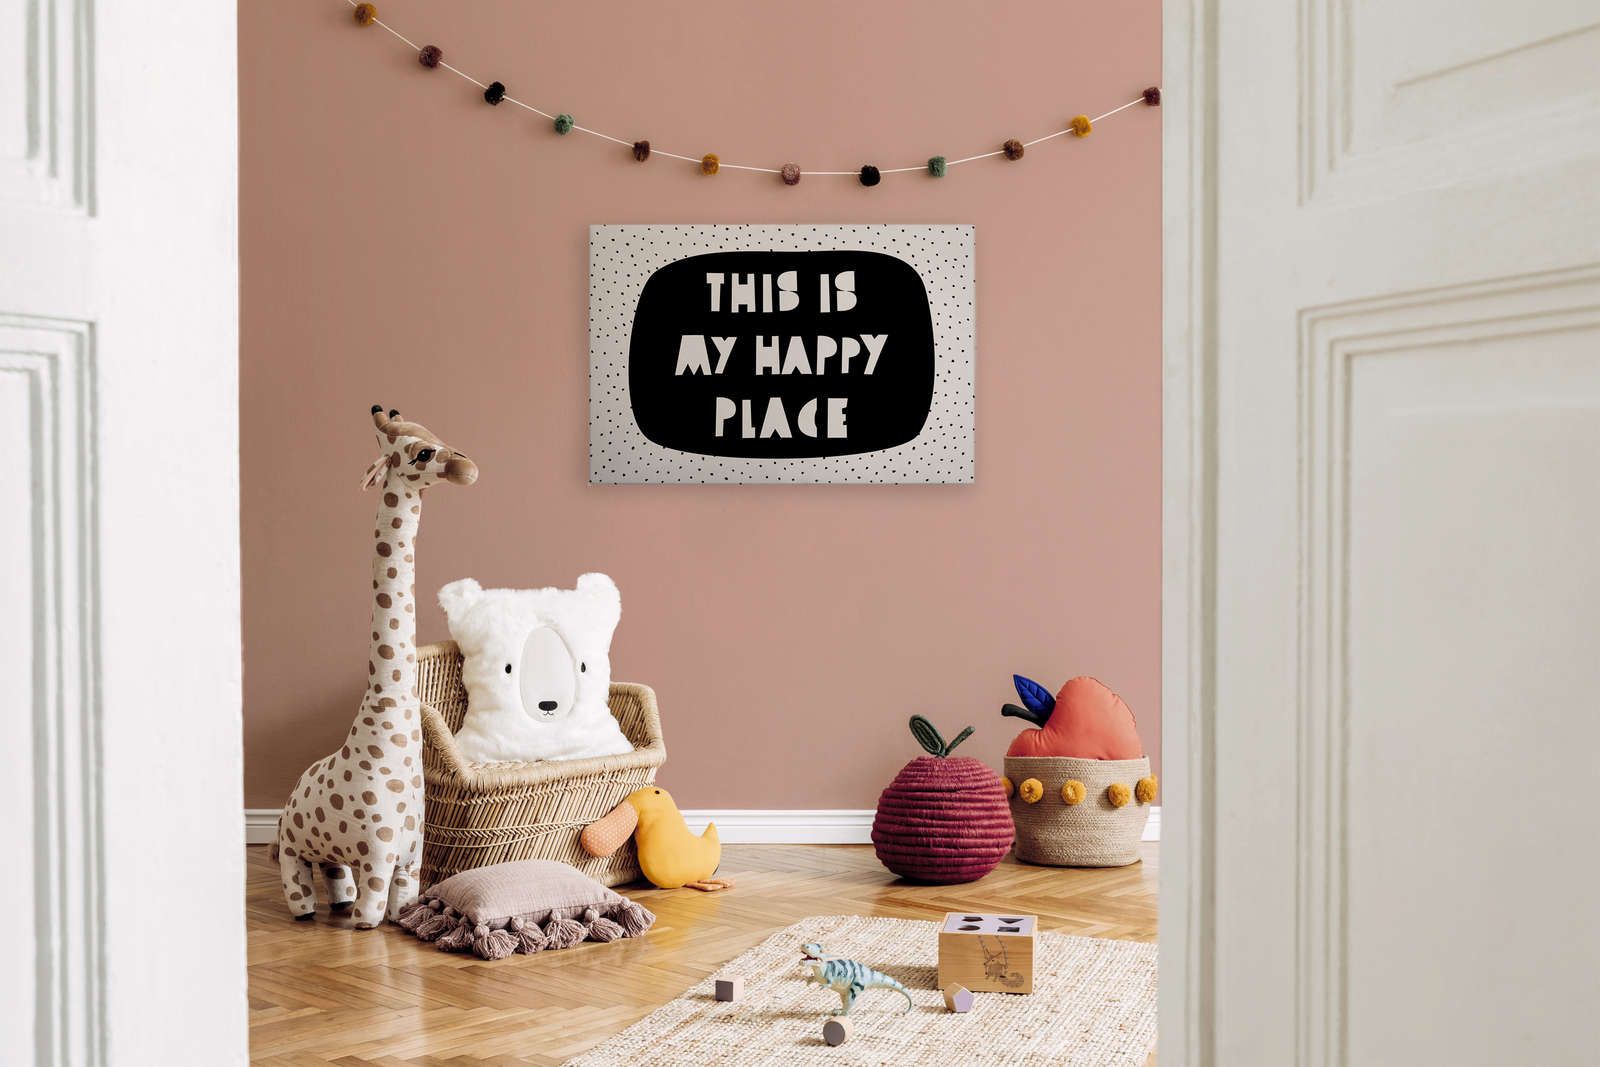             Canvas for children's room with lettering "This is my happy place" - 90 cm x 60 cm
        